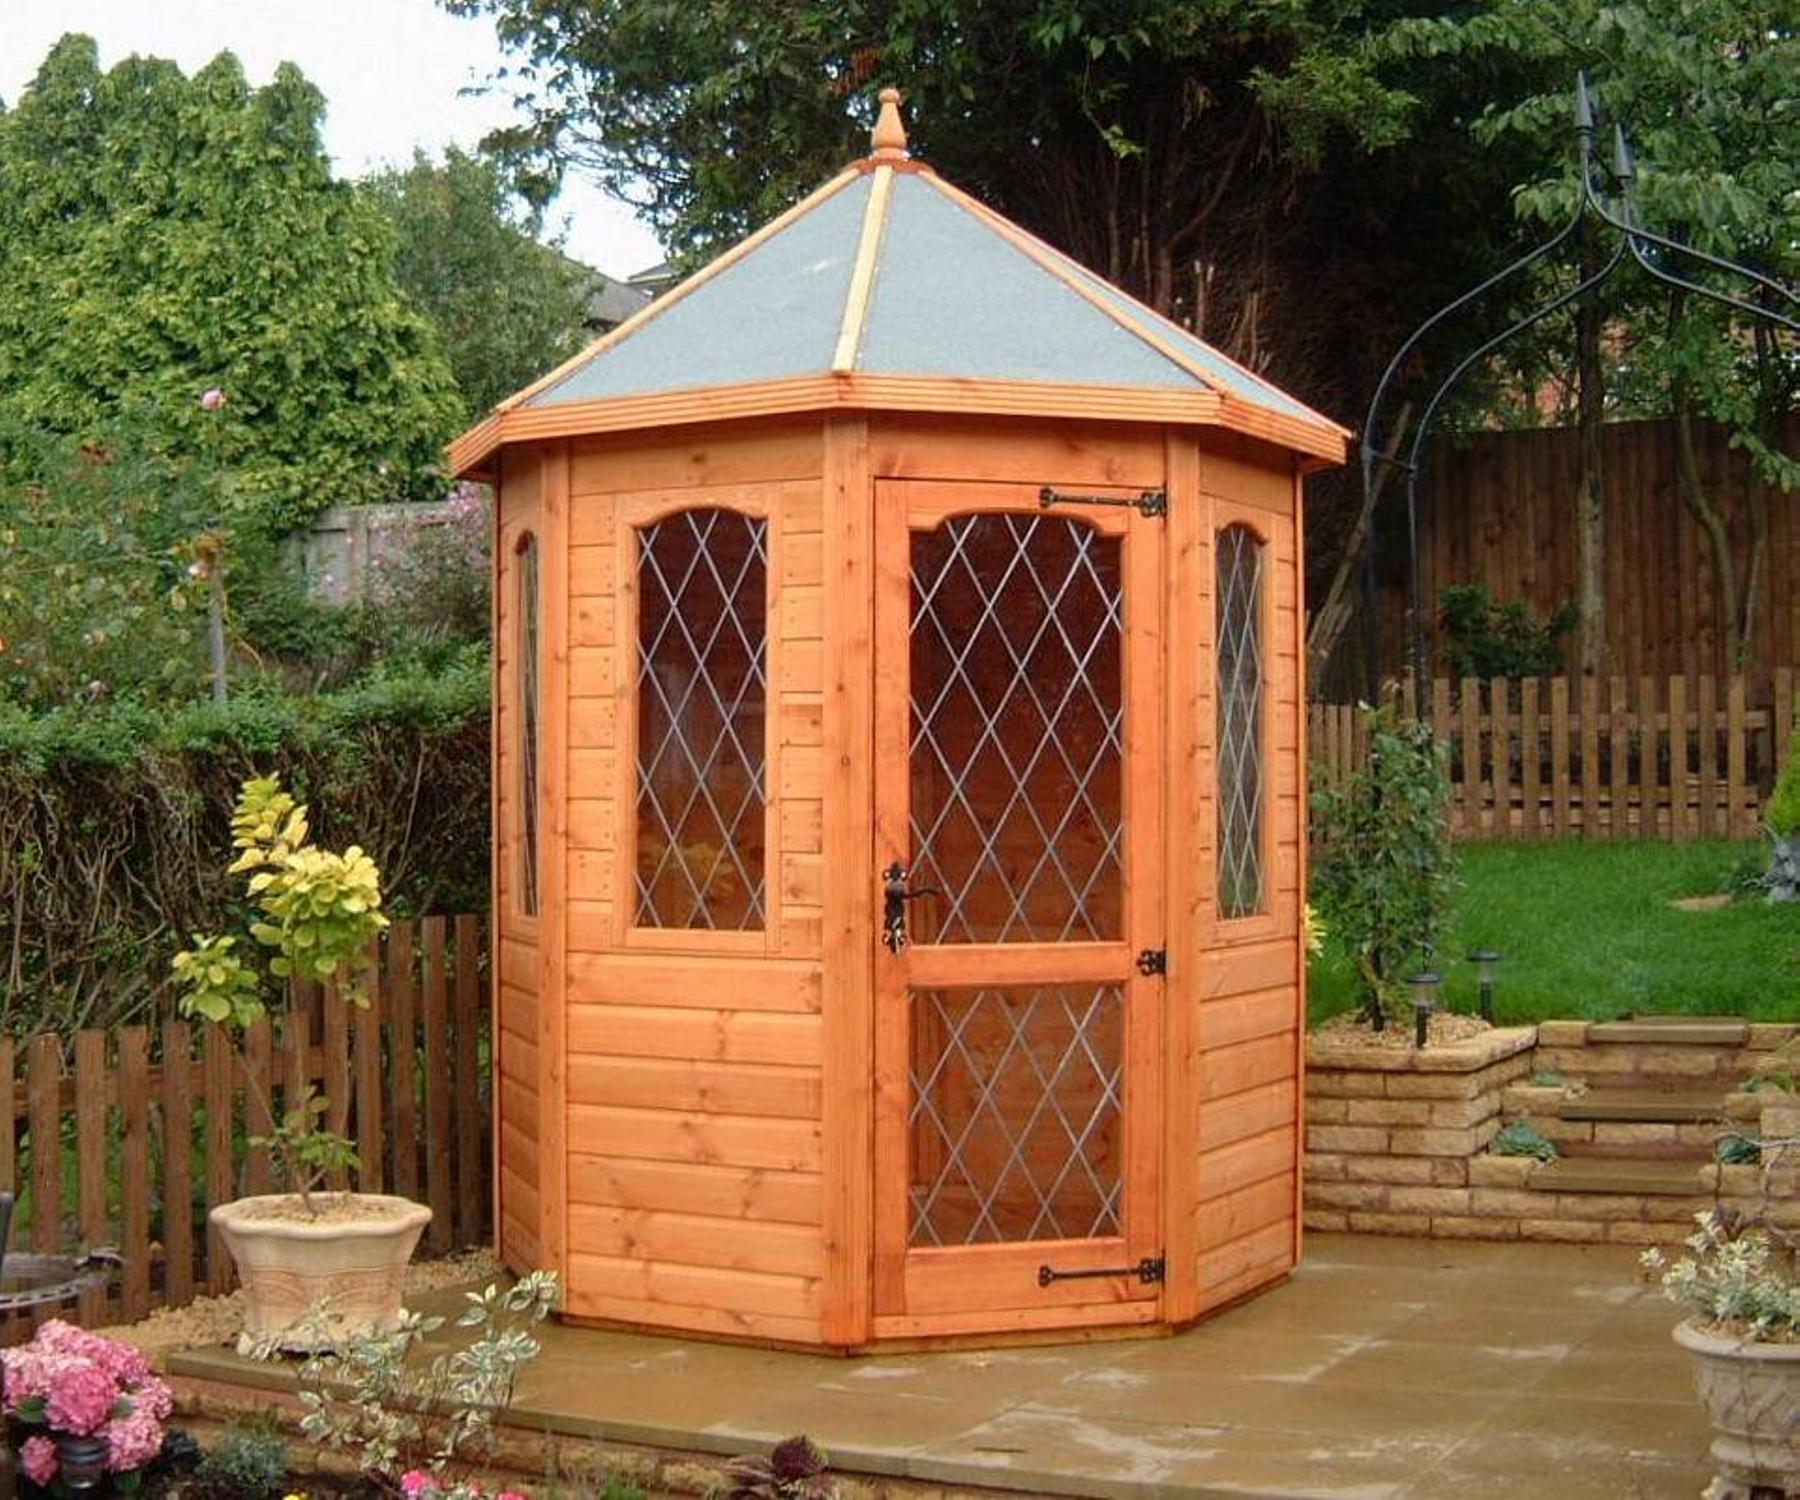  6' x 6' Bromley Summerhouse available from Taunton Sheds